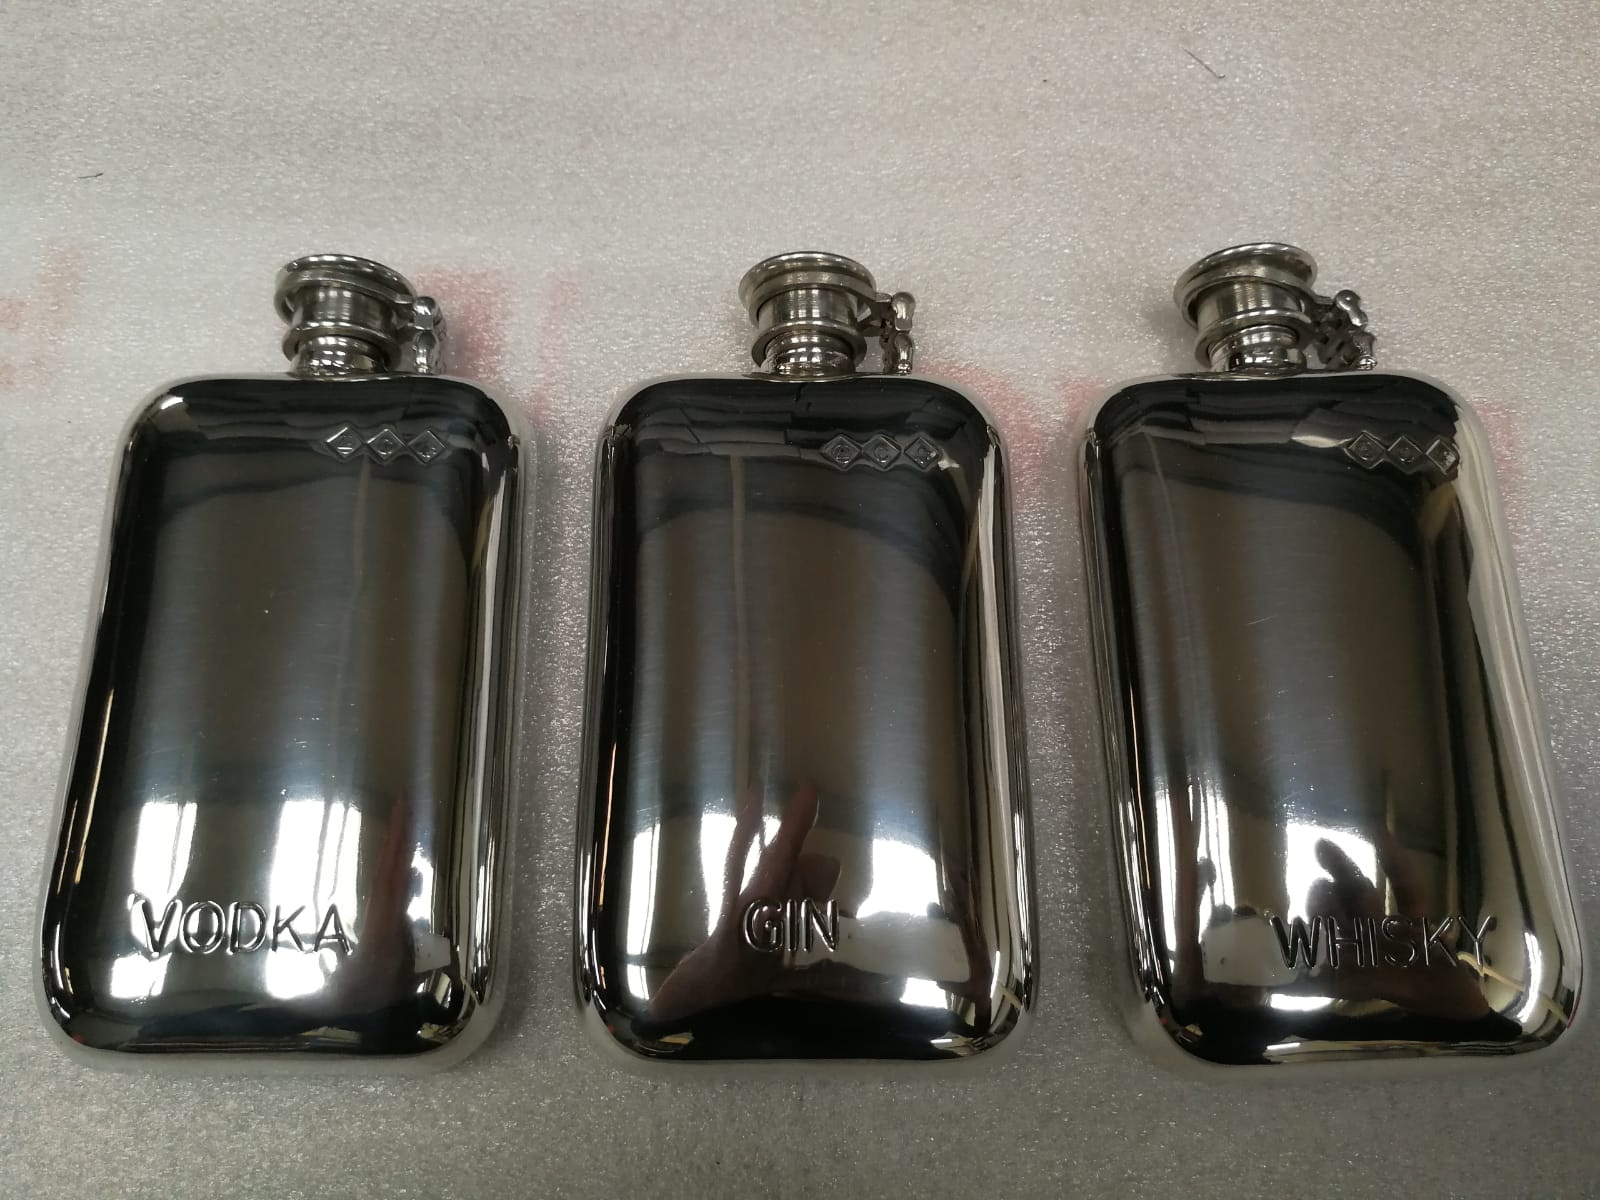 F118 6oz Stamped flask with spirits name embossed